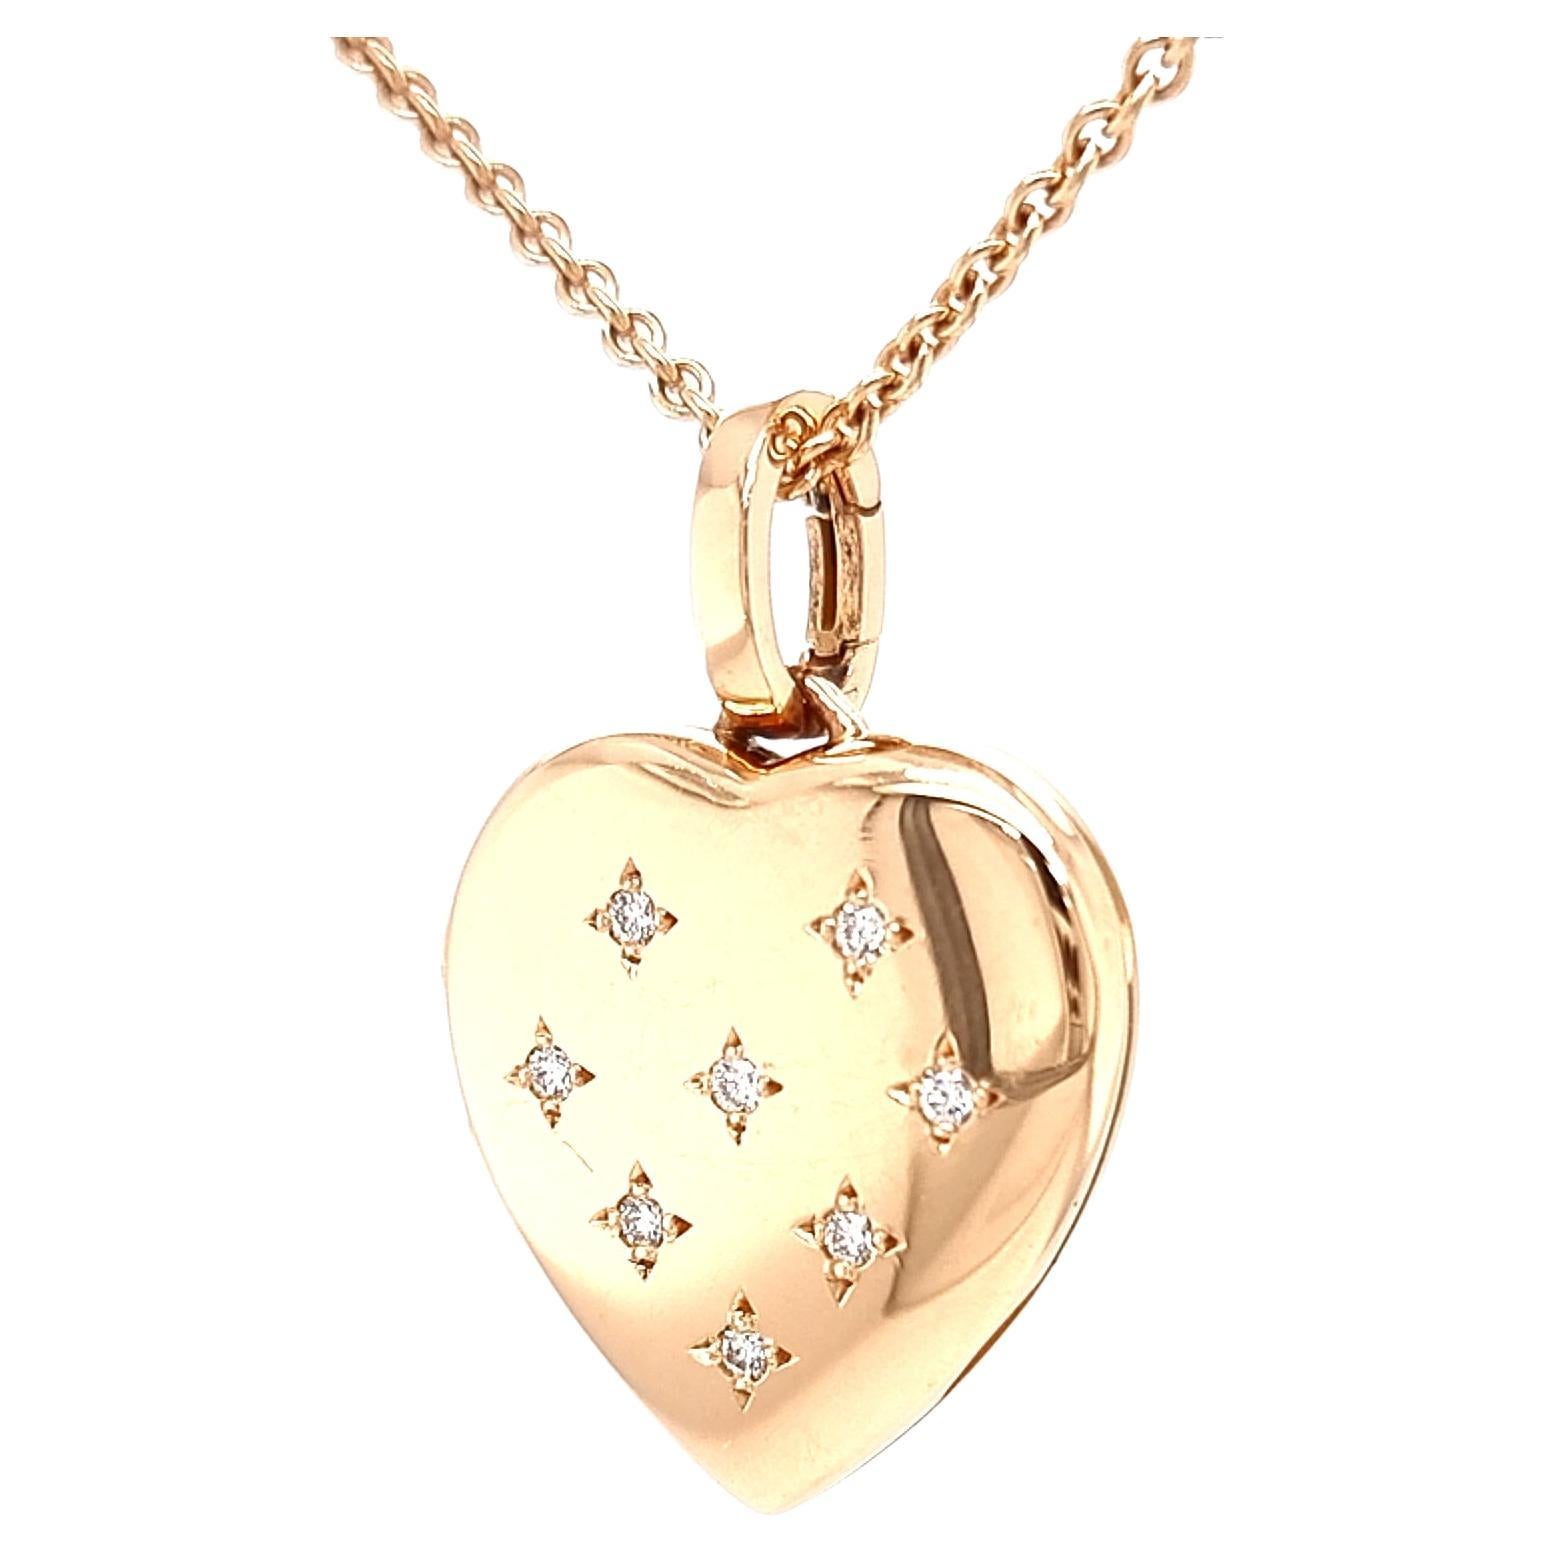 Heart Shaped Locket Pendant by Victor Mayer, 18k Rose Gold, 8 Diamonds 0.16ct For Sale